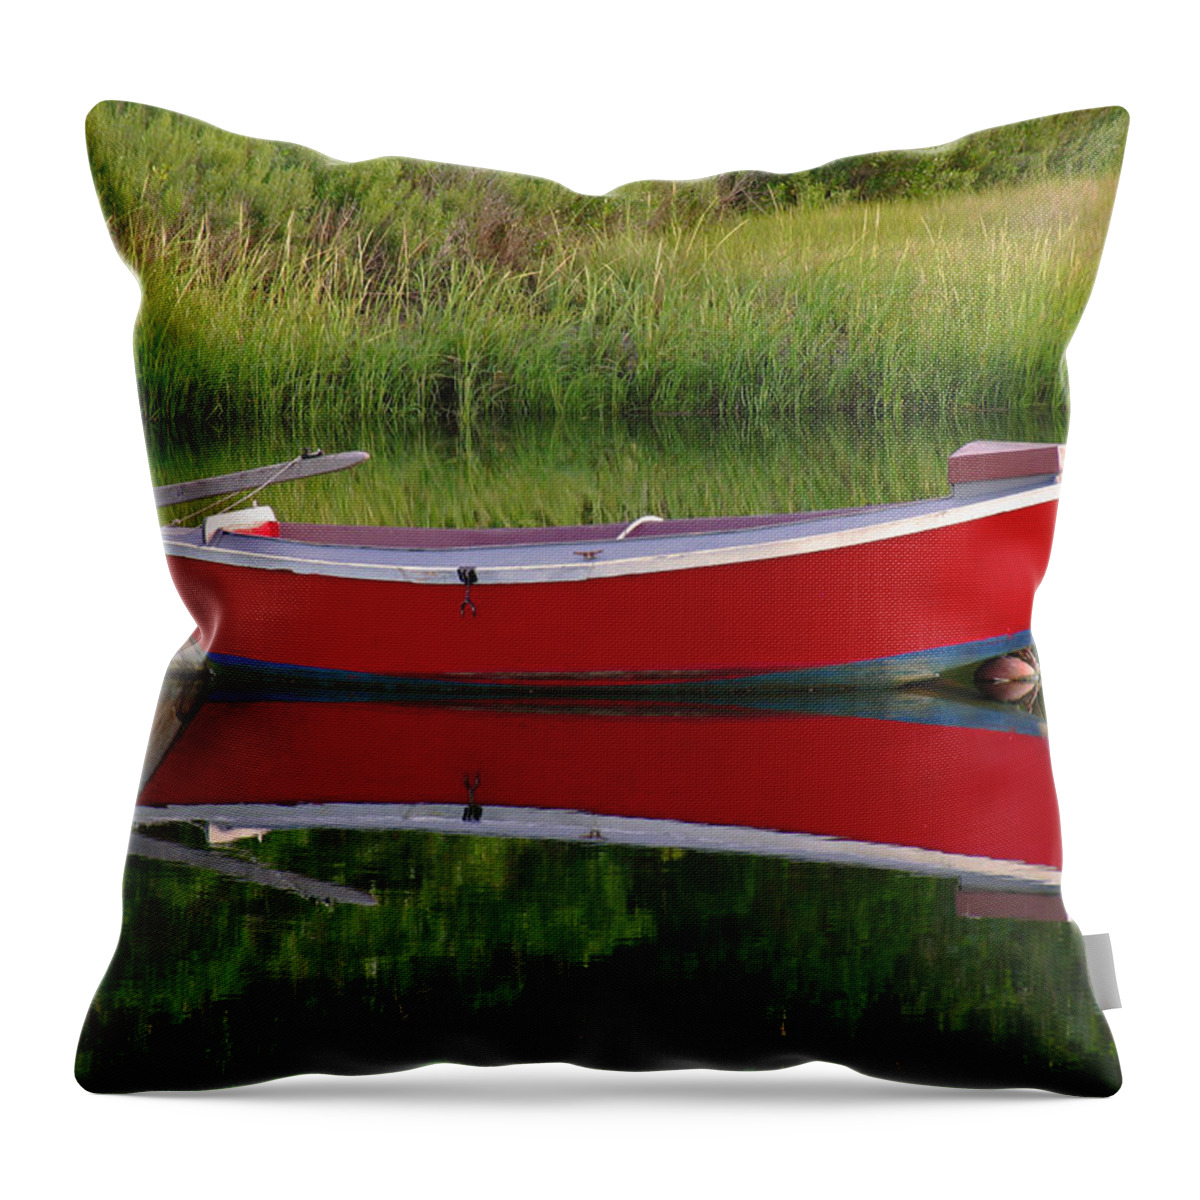 Solitude Throw Pillow featuring the photograph Red Boat by Juergen Roth